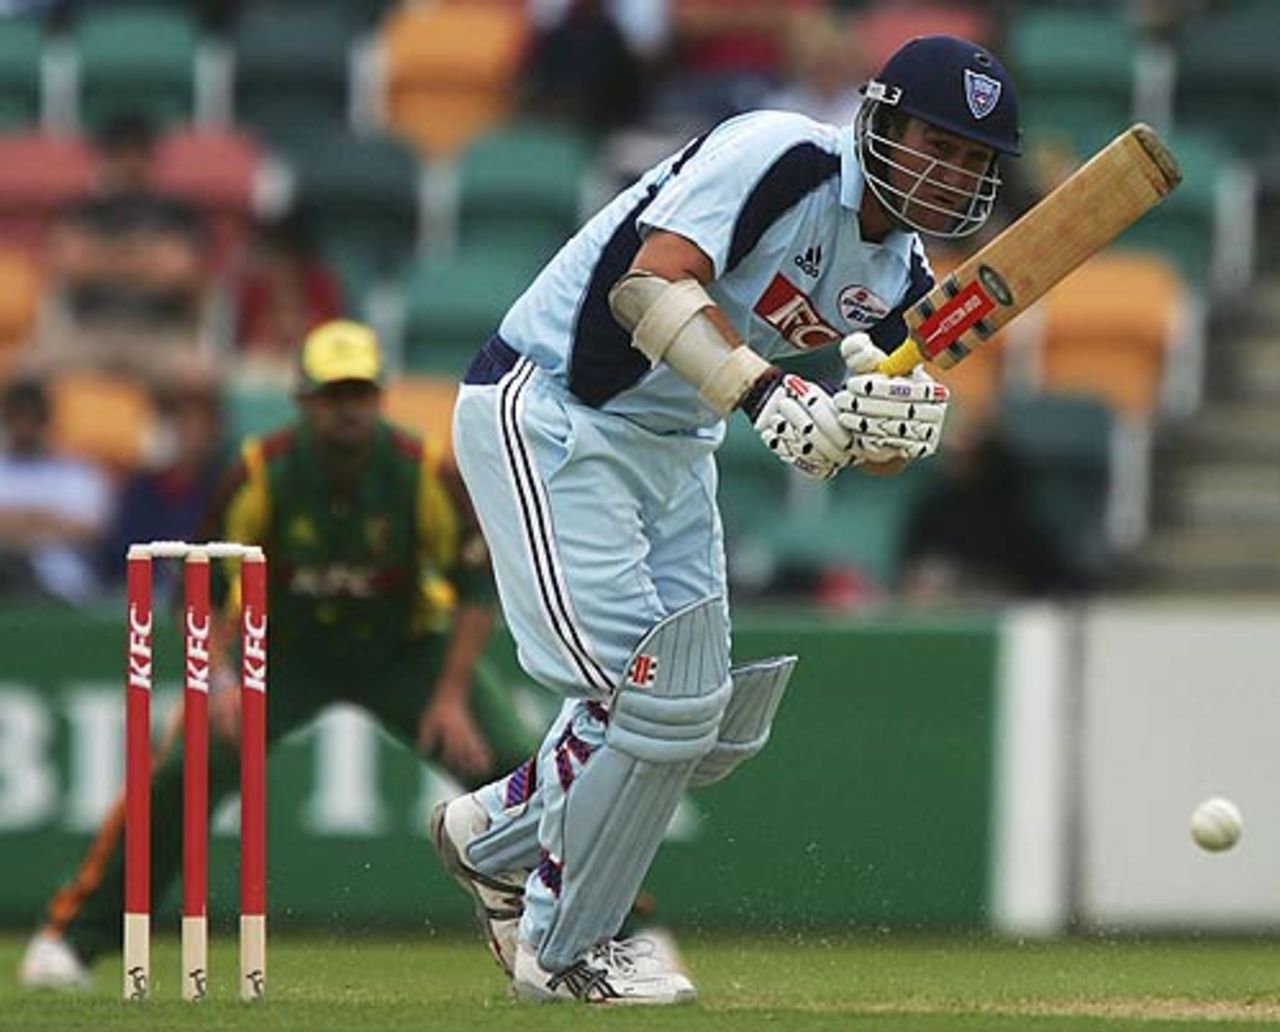 Phil Jaques hit a manic 61 off just 30 deliveries to propel NSW, Tasmania v New South Wales, Australian Twenty20 Competition, Group B, Bellerive Oval, Hobart, January 10, 2005